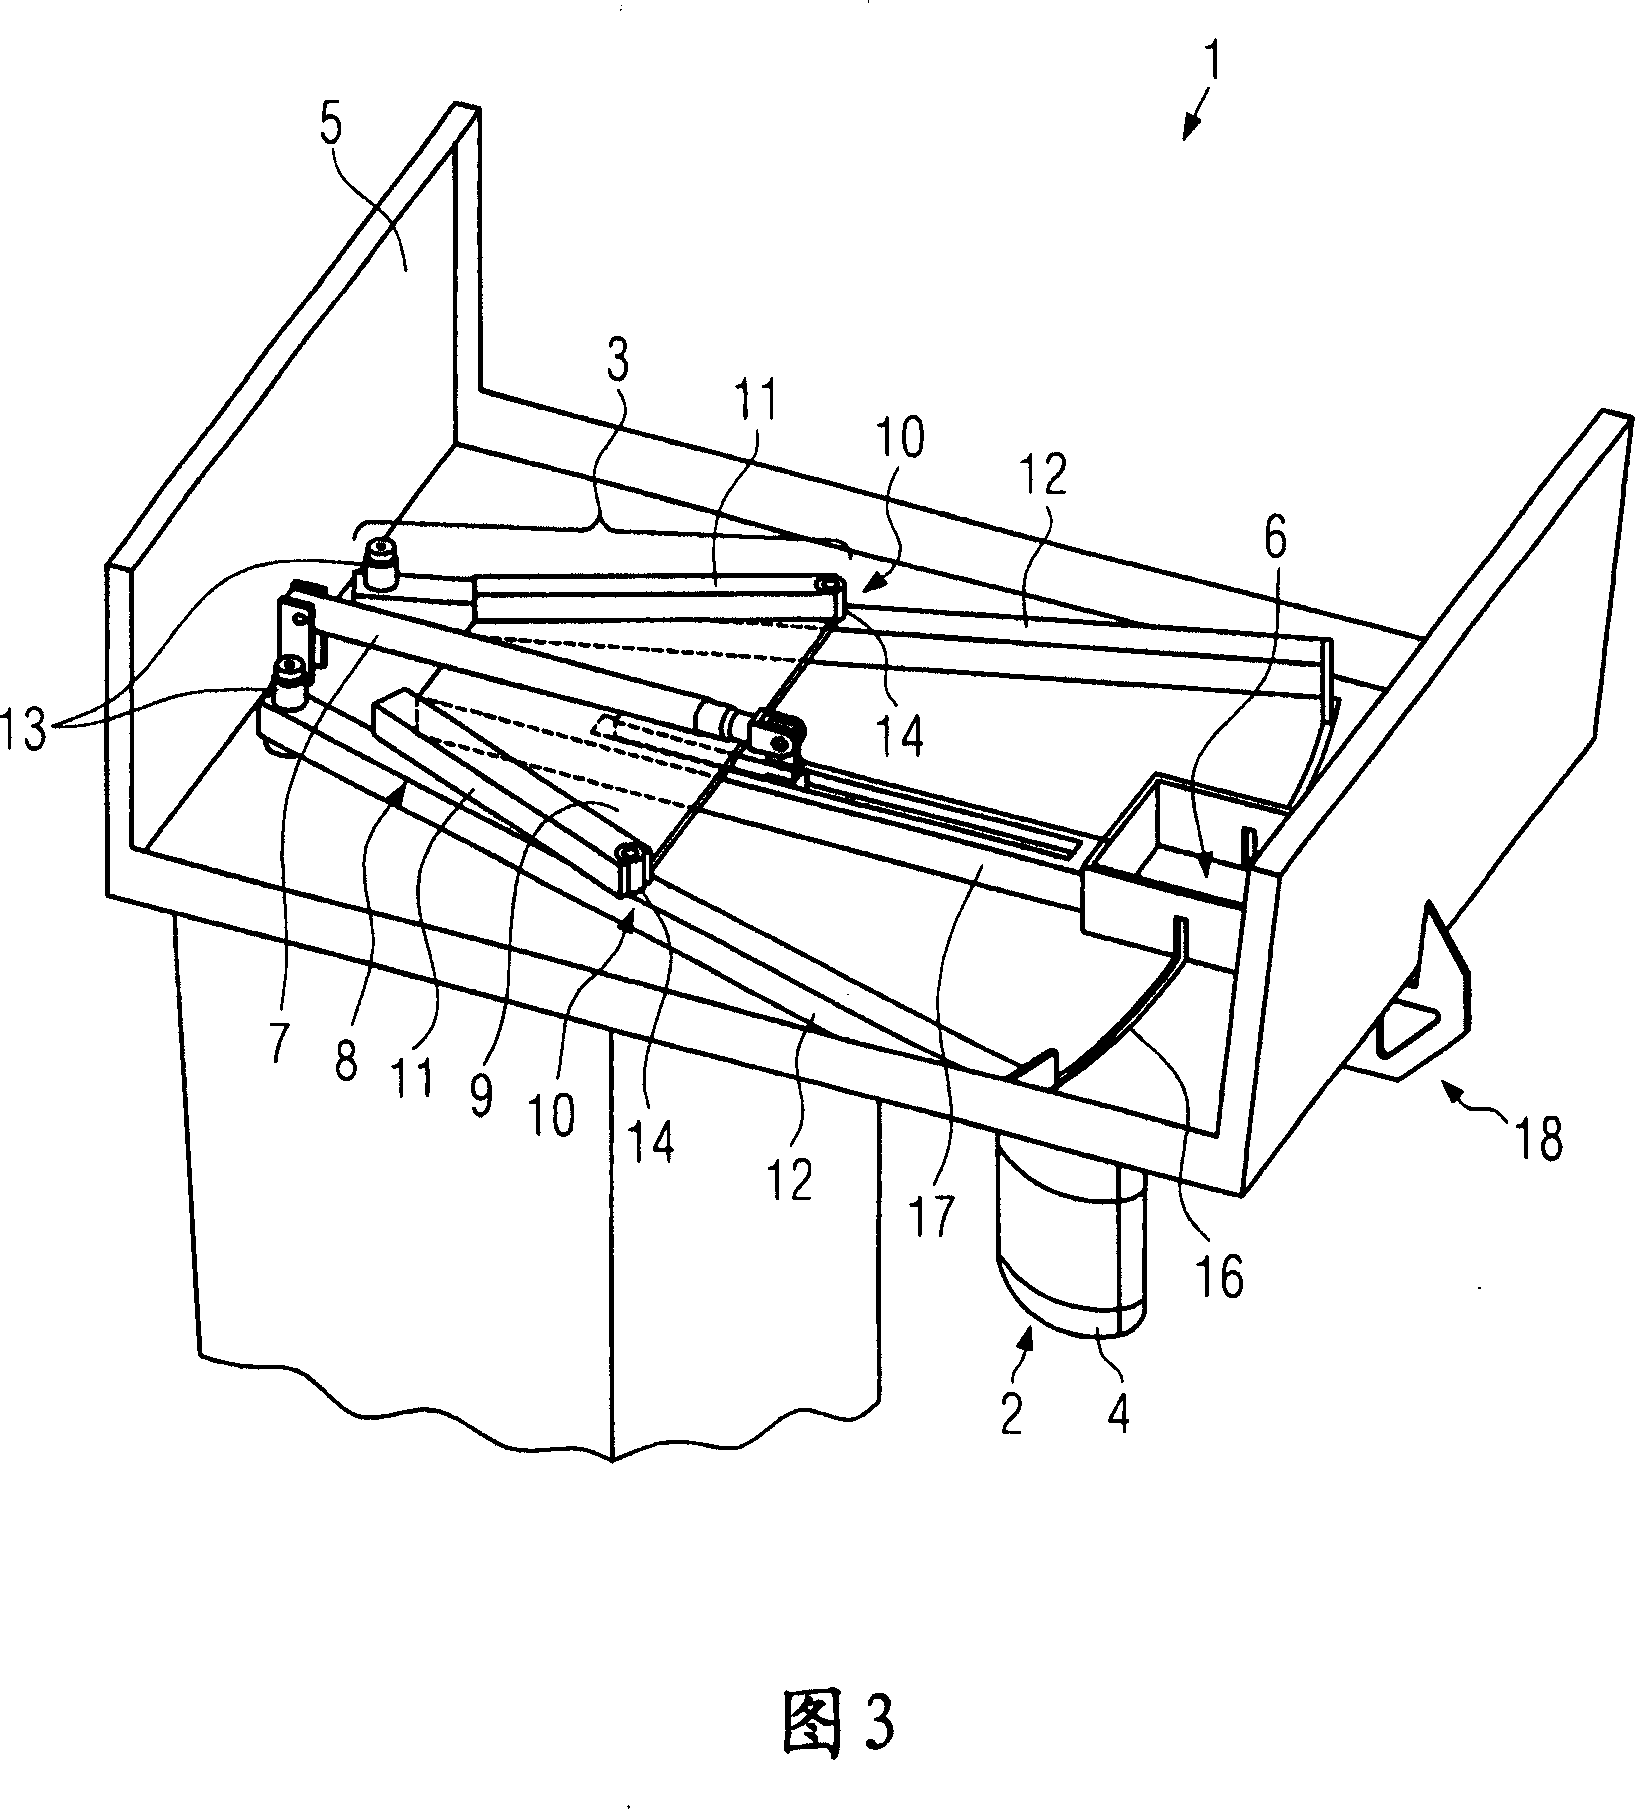 Trousers flattening machine containing stretching device containing claw connected to rotable rack